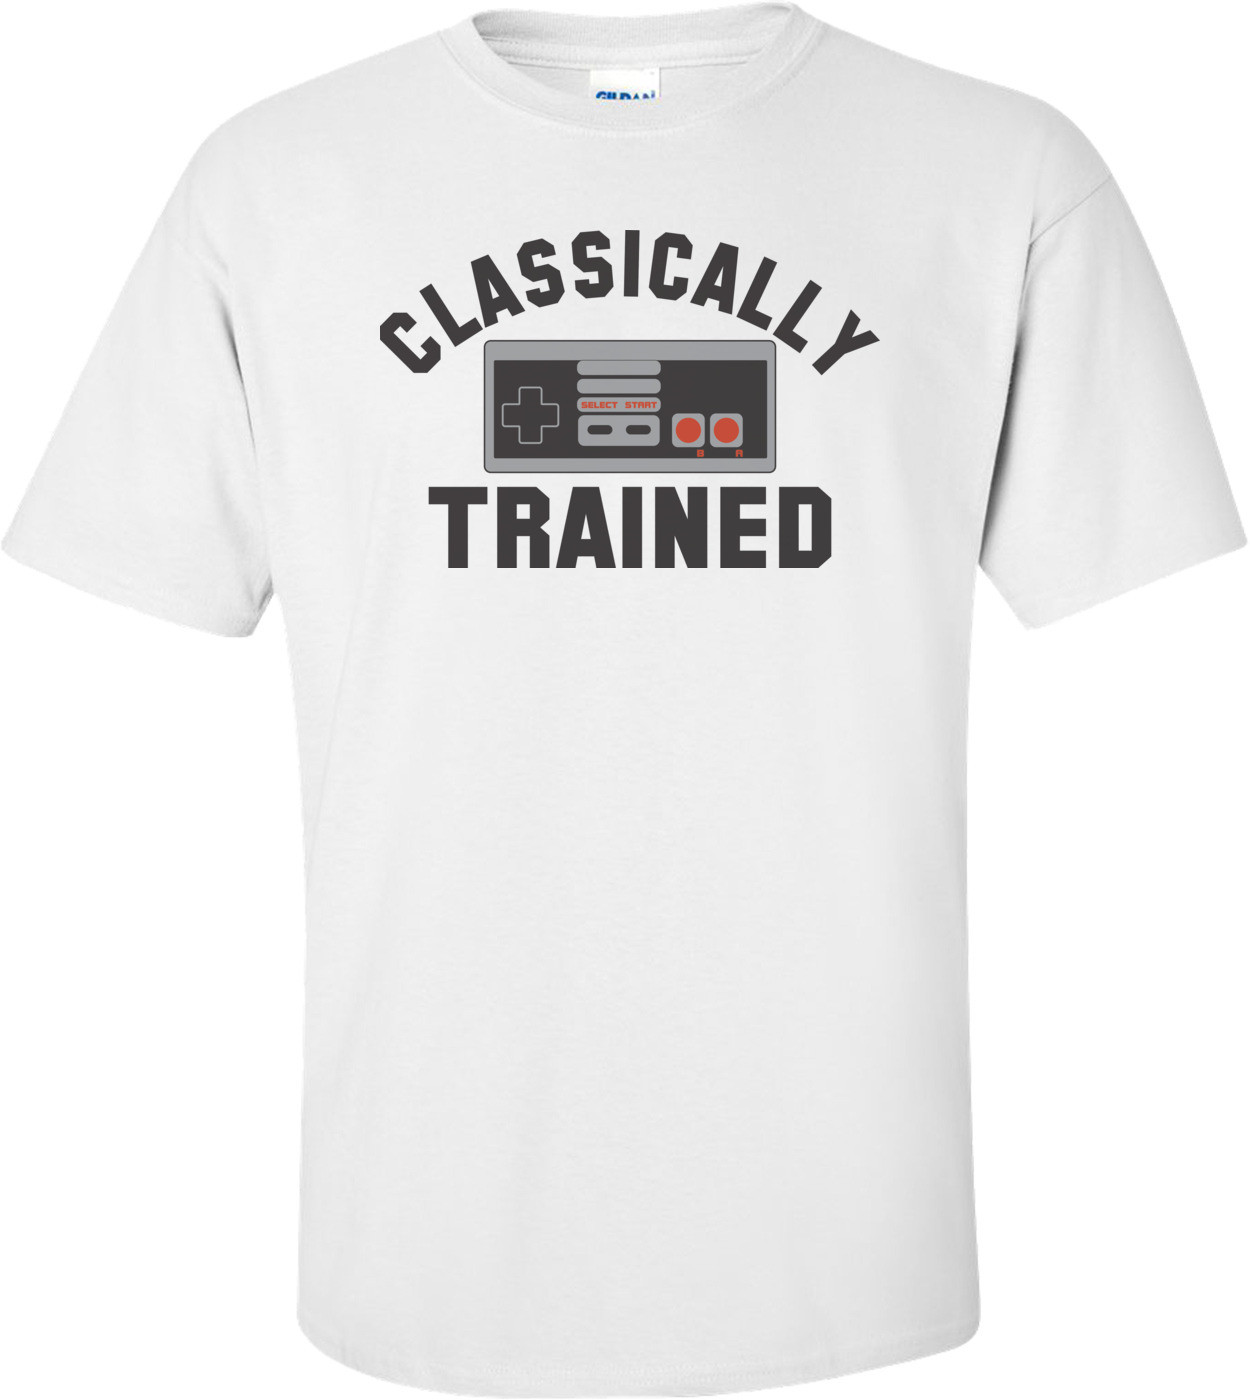 Classically Trained T-shirt